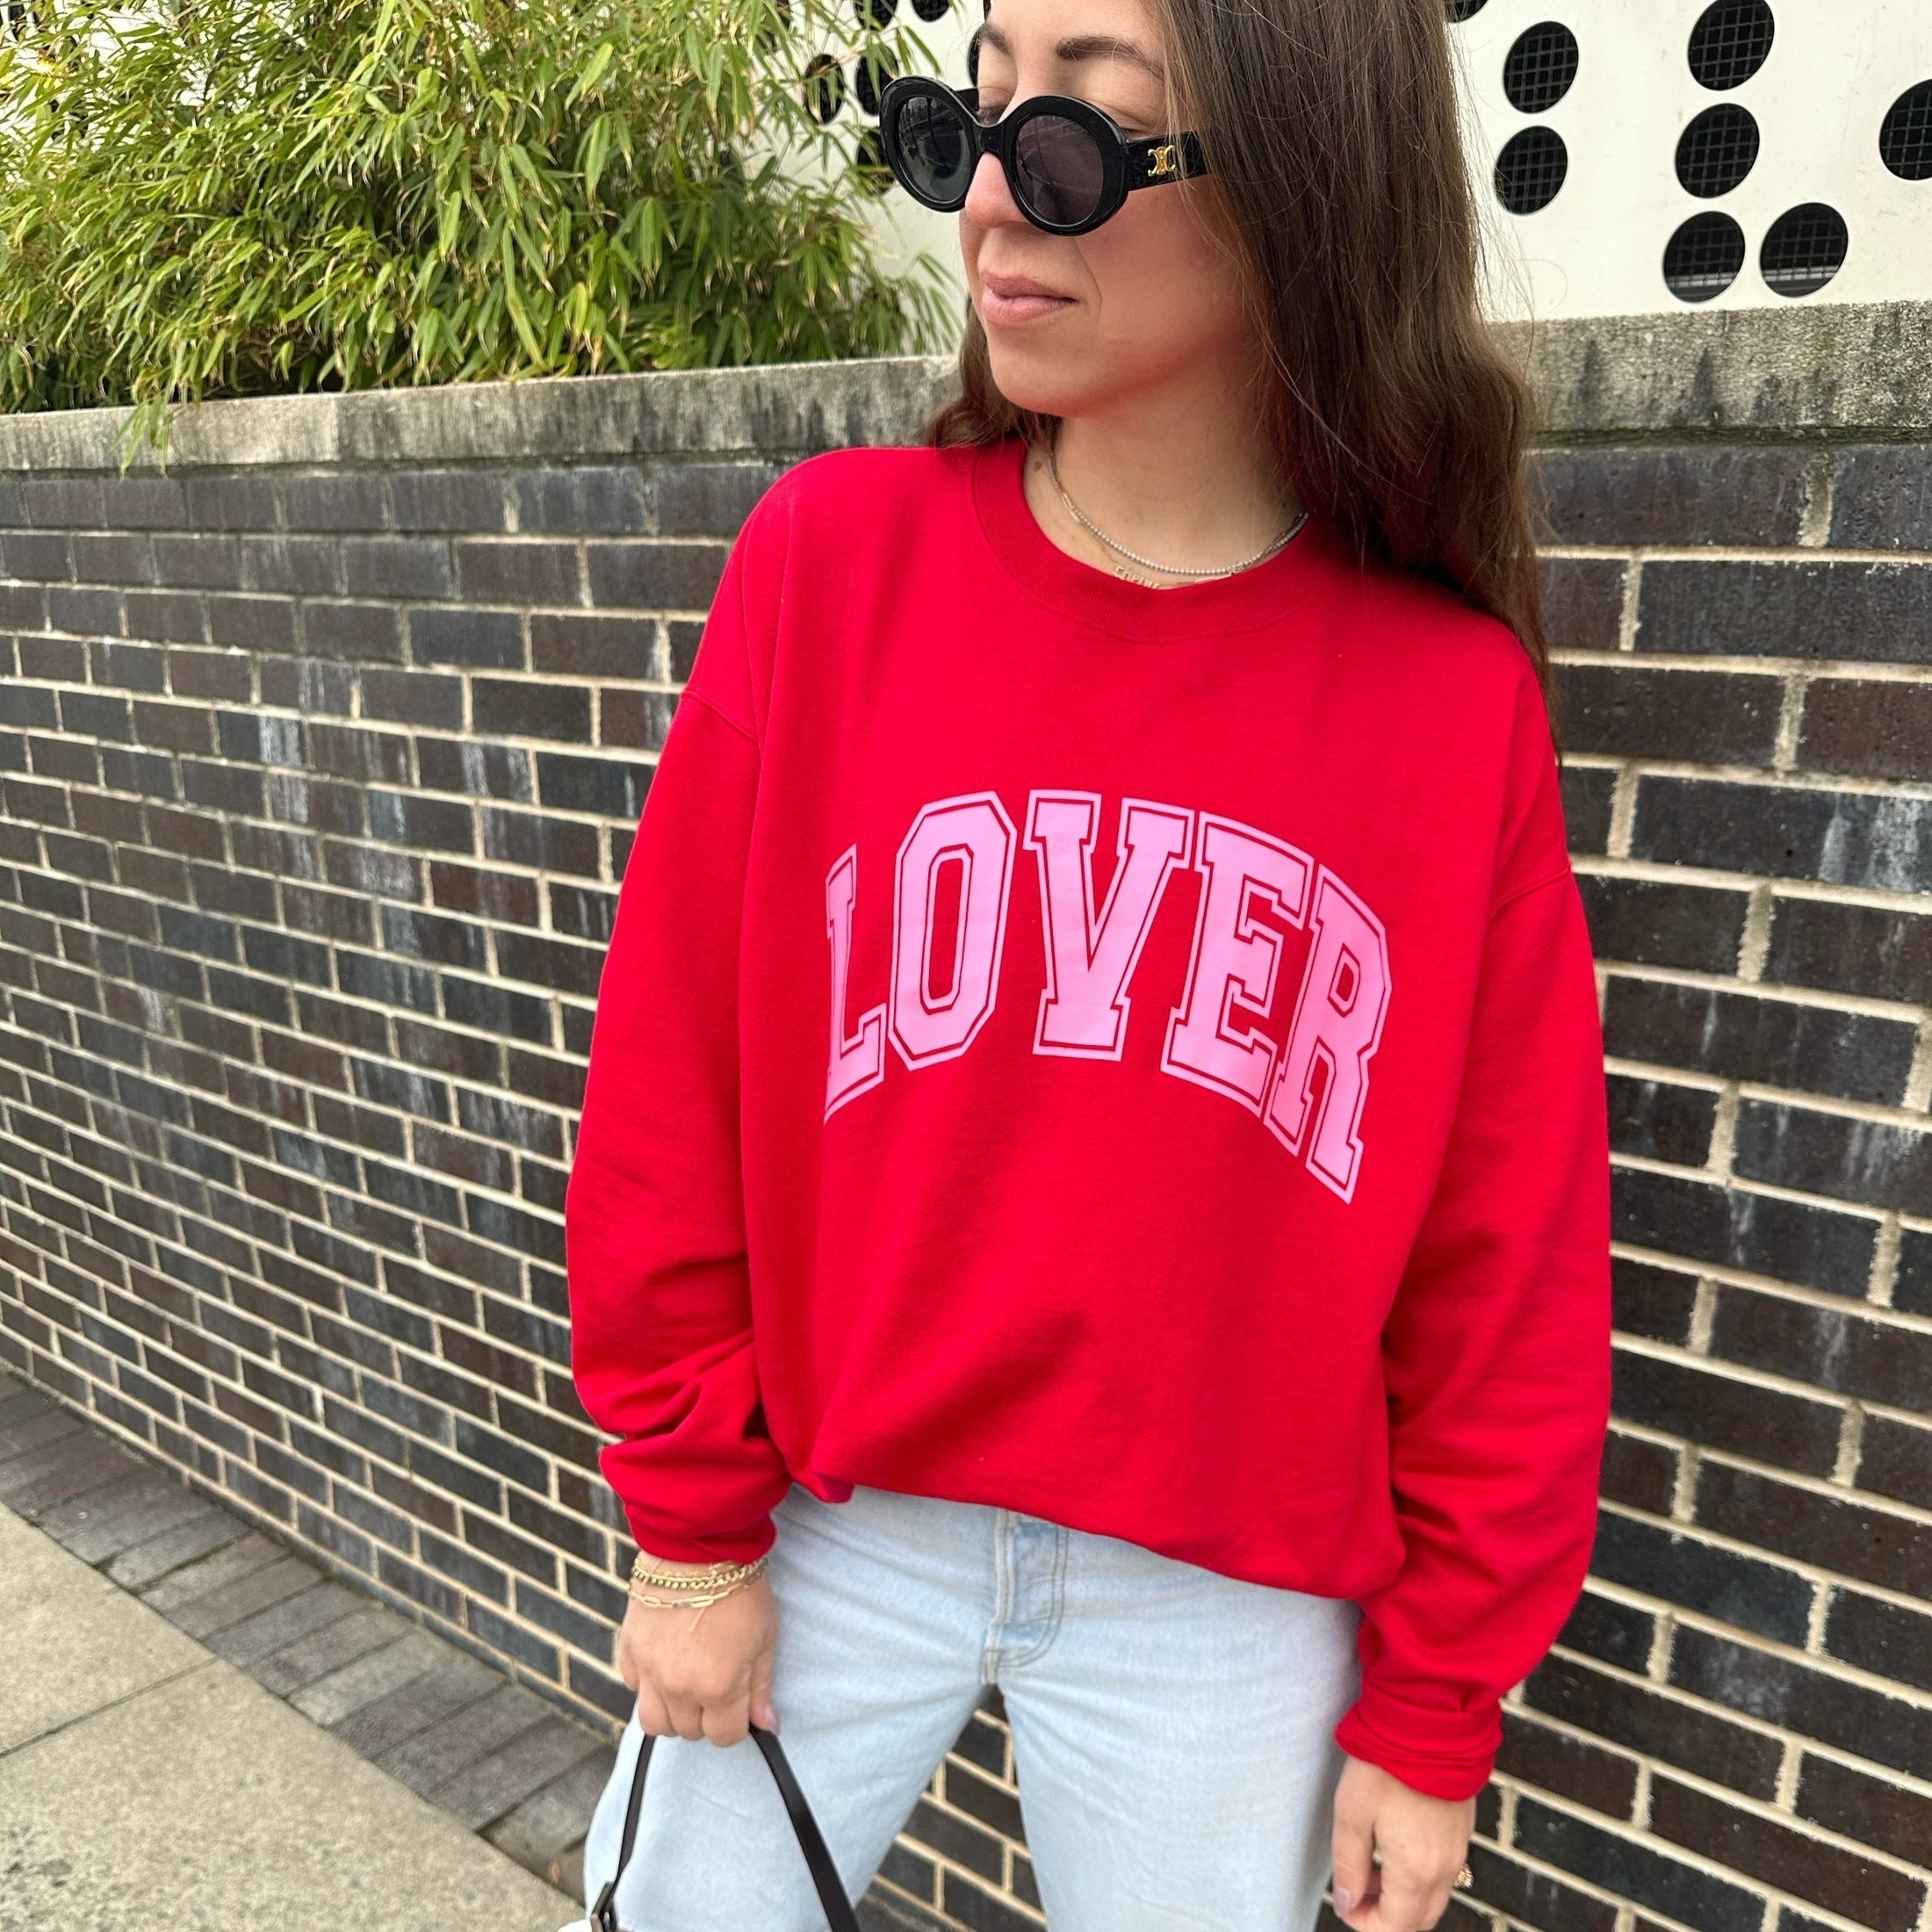 a model wearing a red sweatshirt that says &quot;lover&quot; in pink